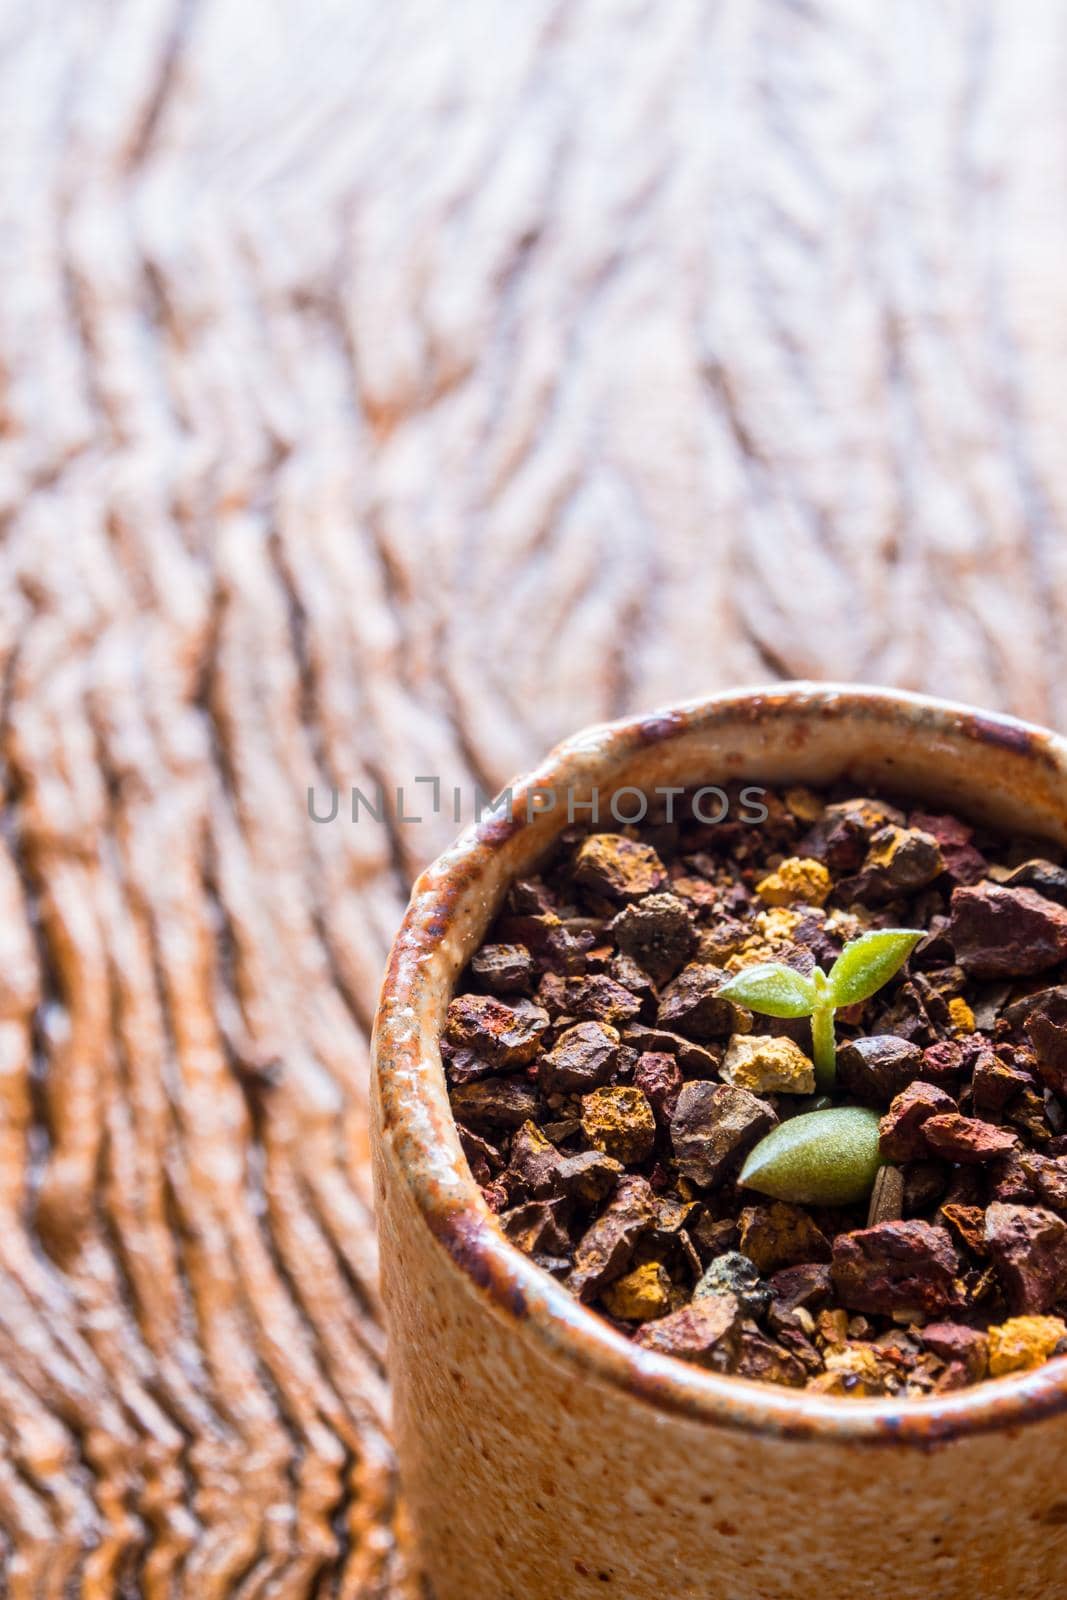 Bud leaf of small succulent plant growing on the laterite gravel in the small pot